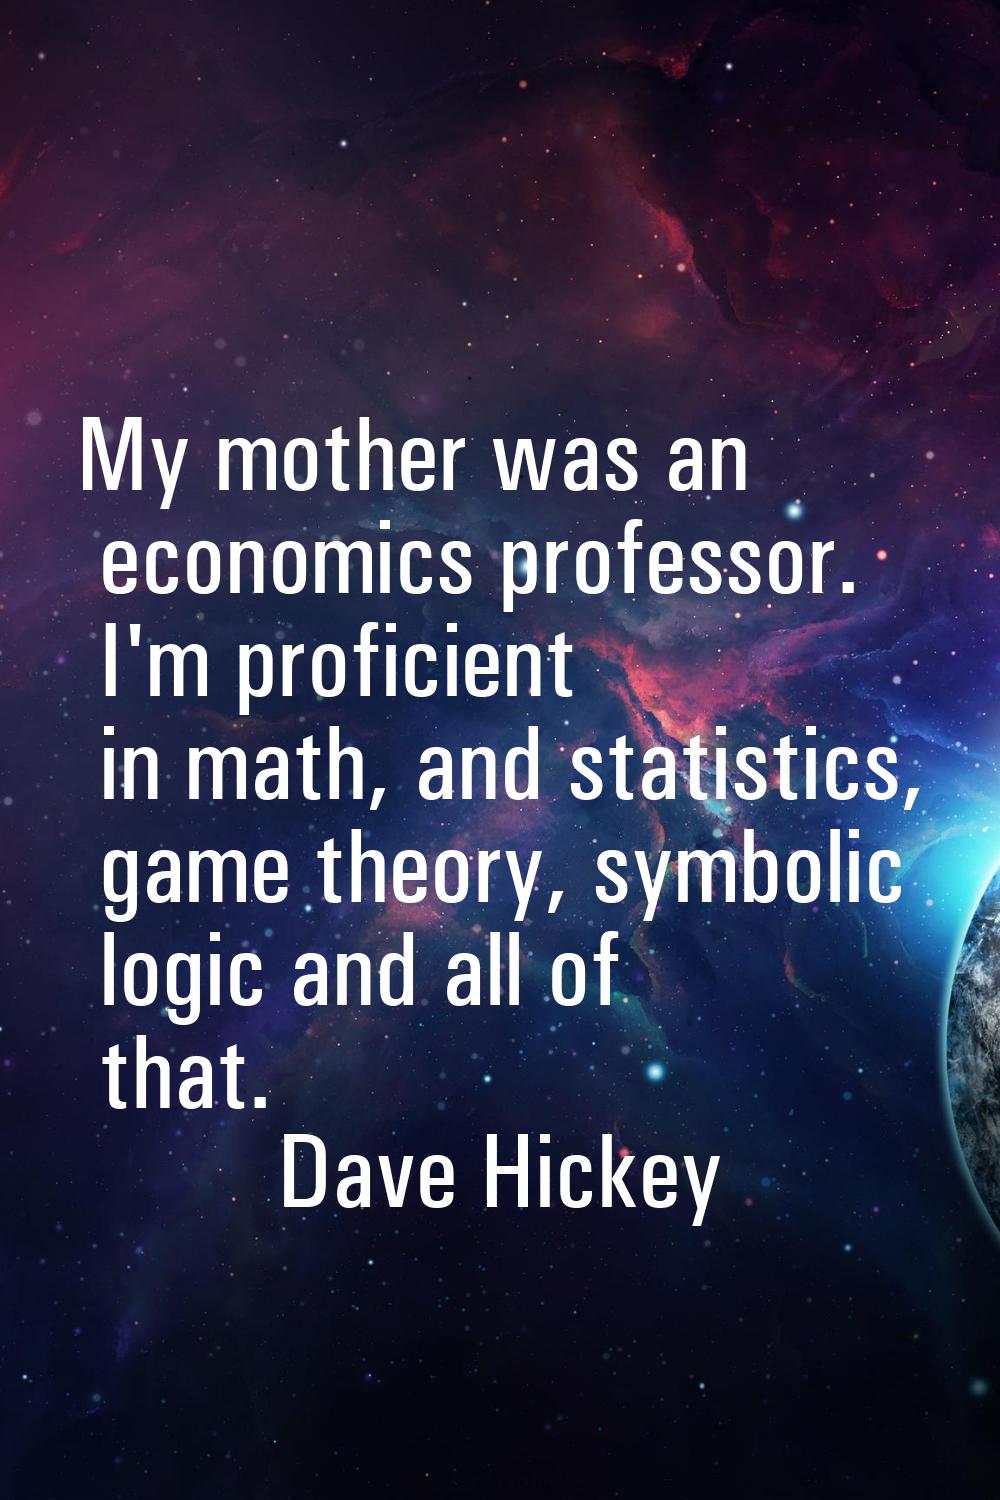 My mother was an economics professor. I'm proficient in math, and statistics, game theory, symbolic